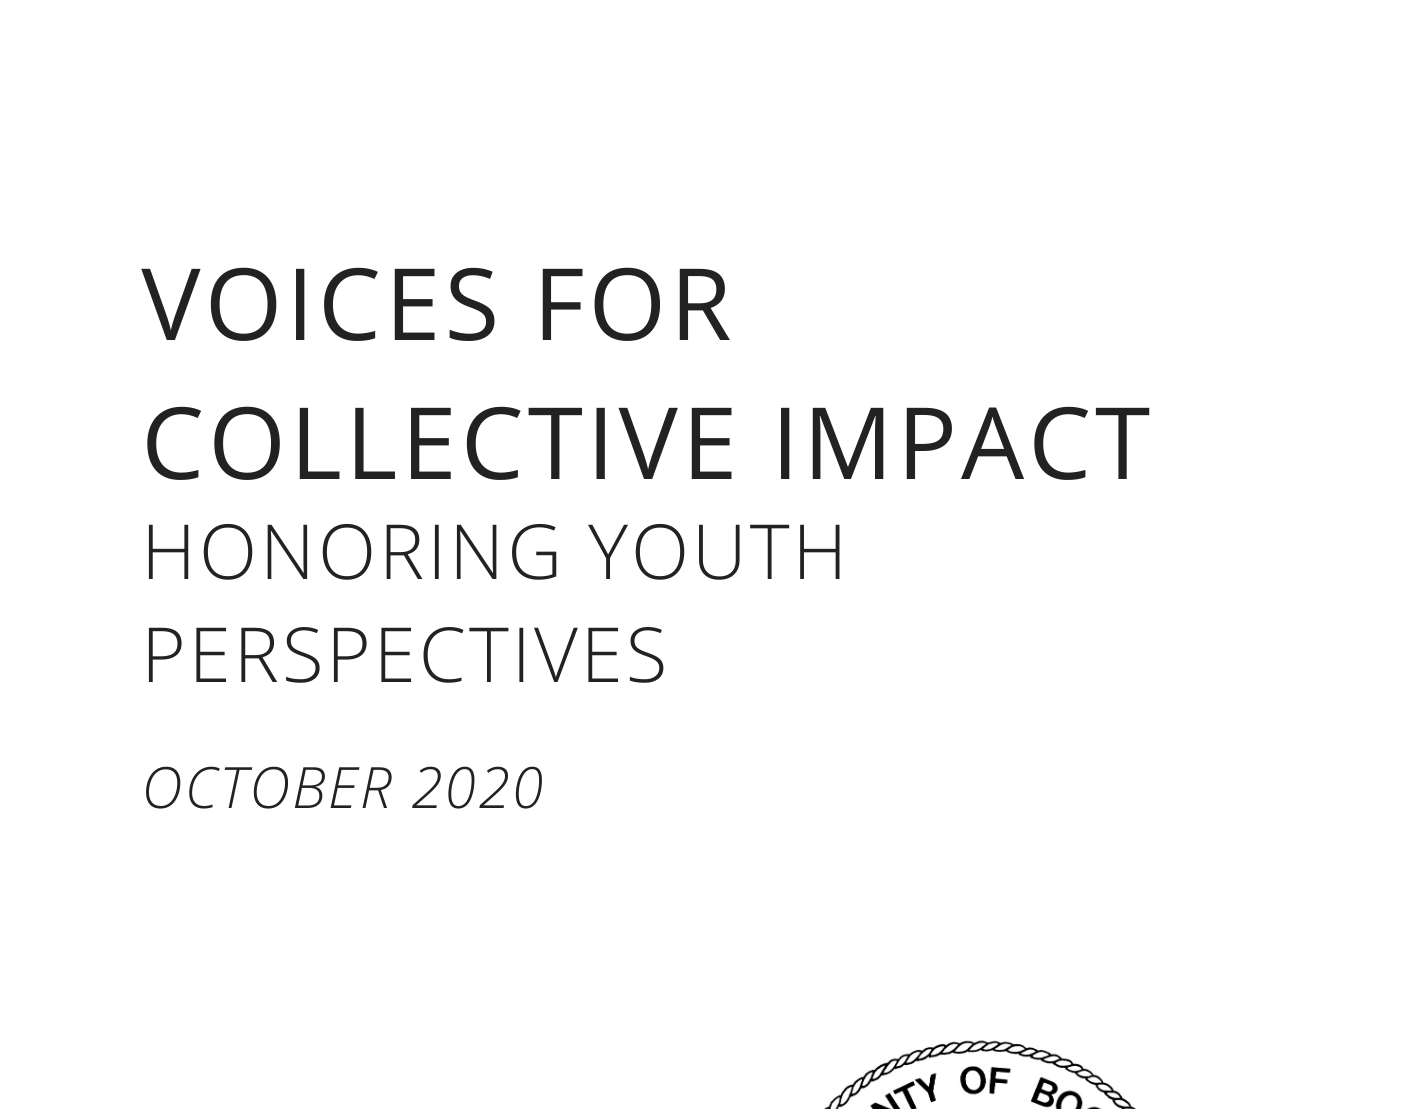 Voices for Collective Impact - Honoring Youth Perspectives Report - October 2020